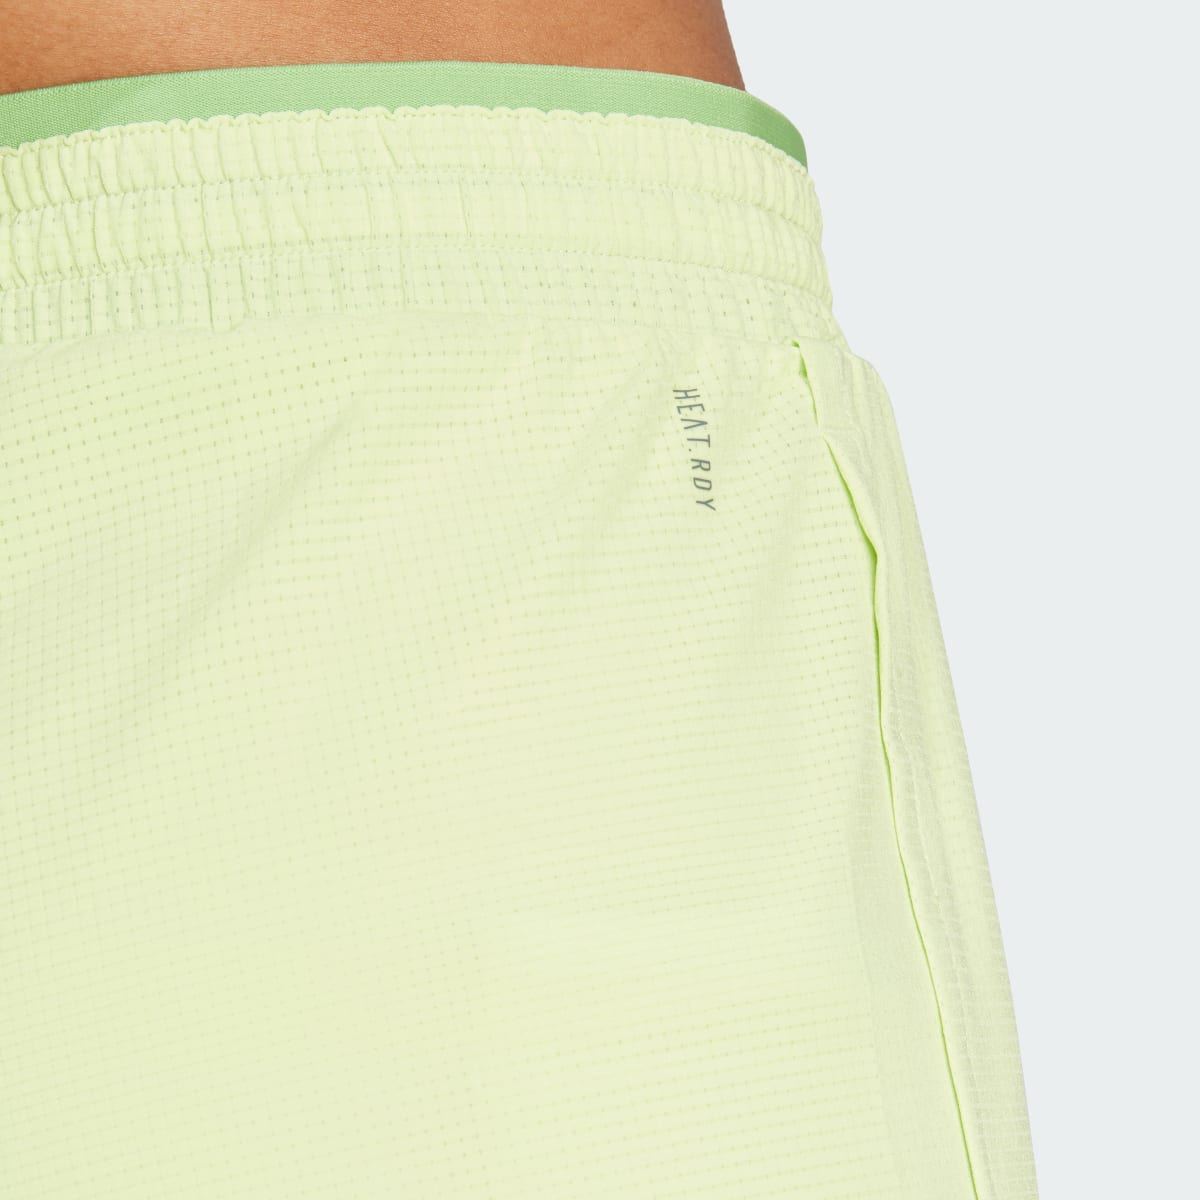 Adidas HIIT HEAT.RDY Two-in-One Shorts. 6